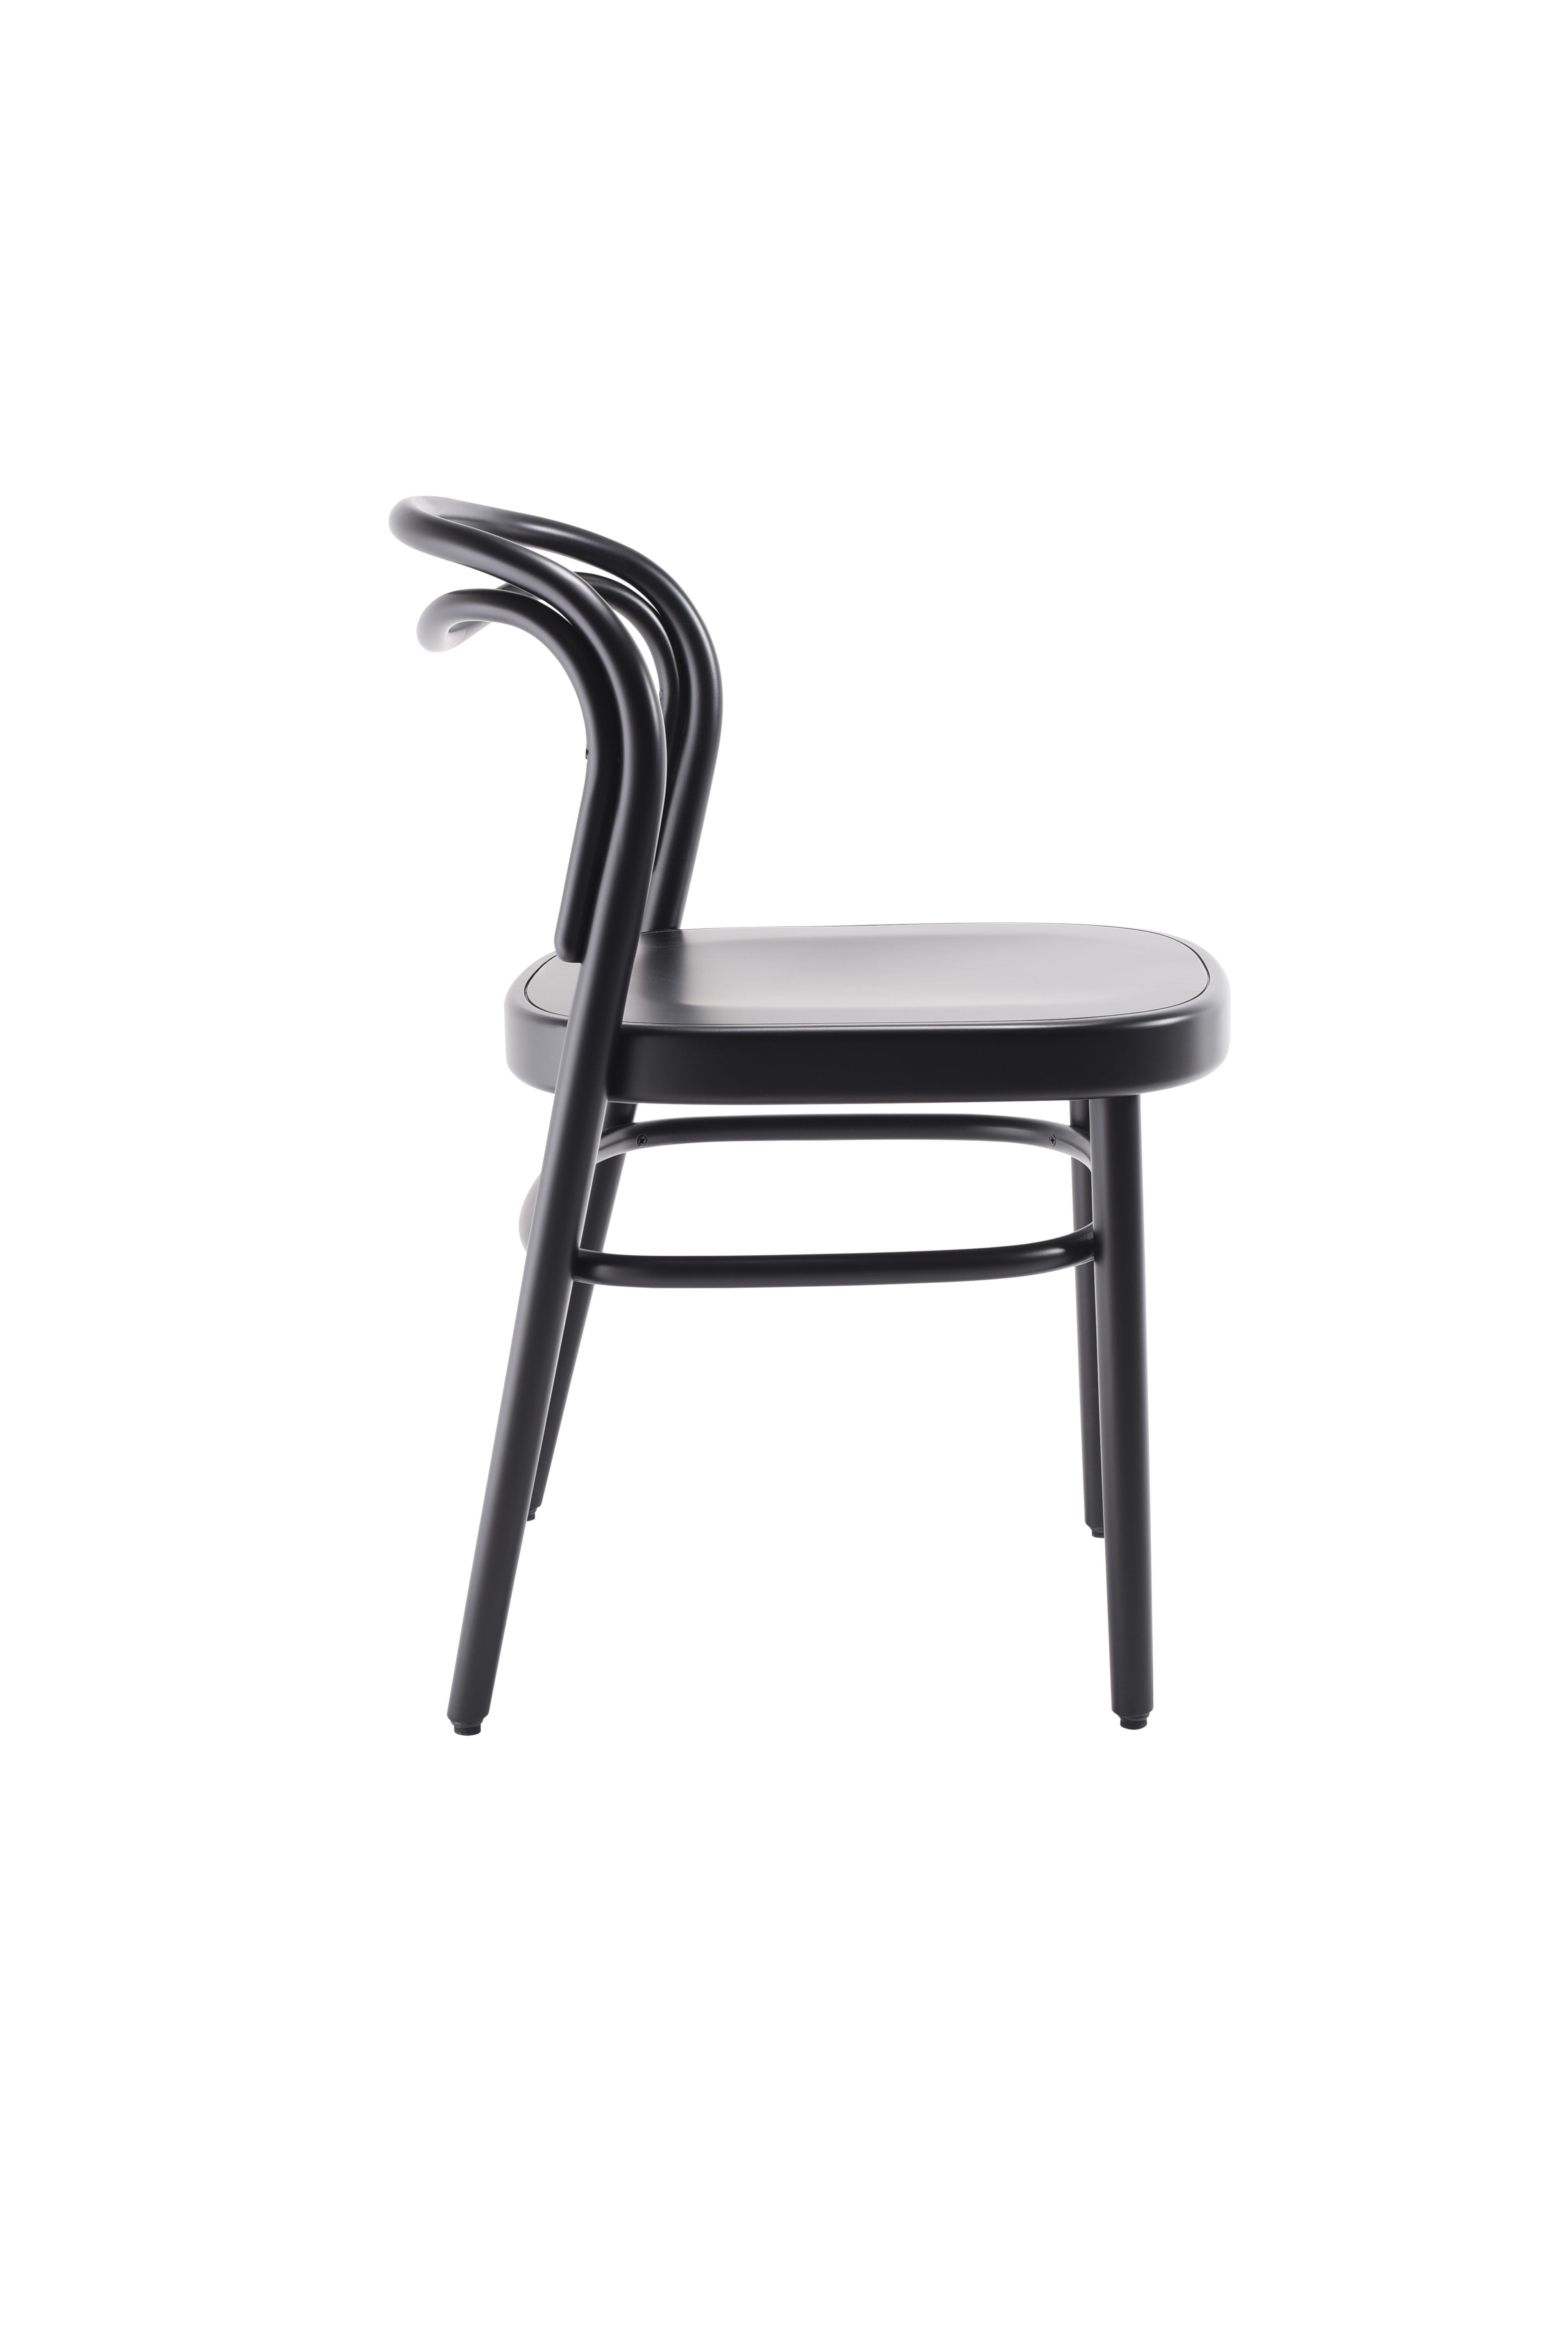 Gebrüder Thonet Vienna Beaulieu Chair with Plywood Seat by Philippe Nigro For Sale 5